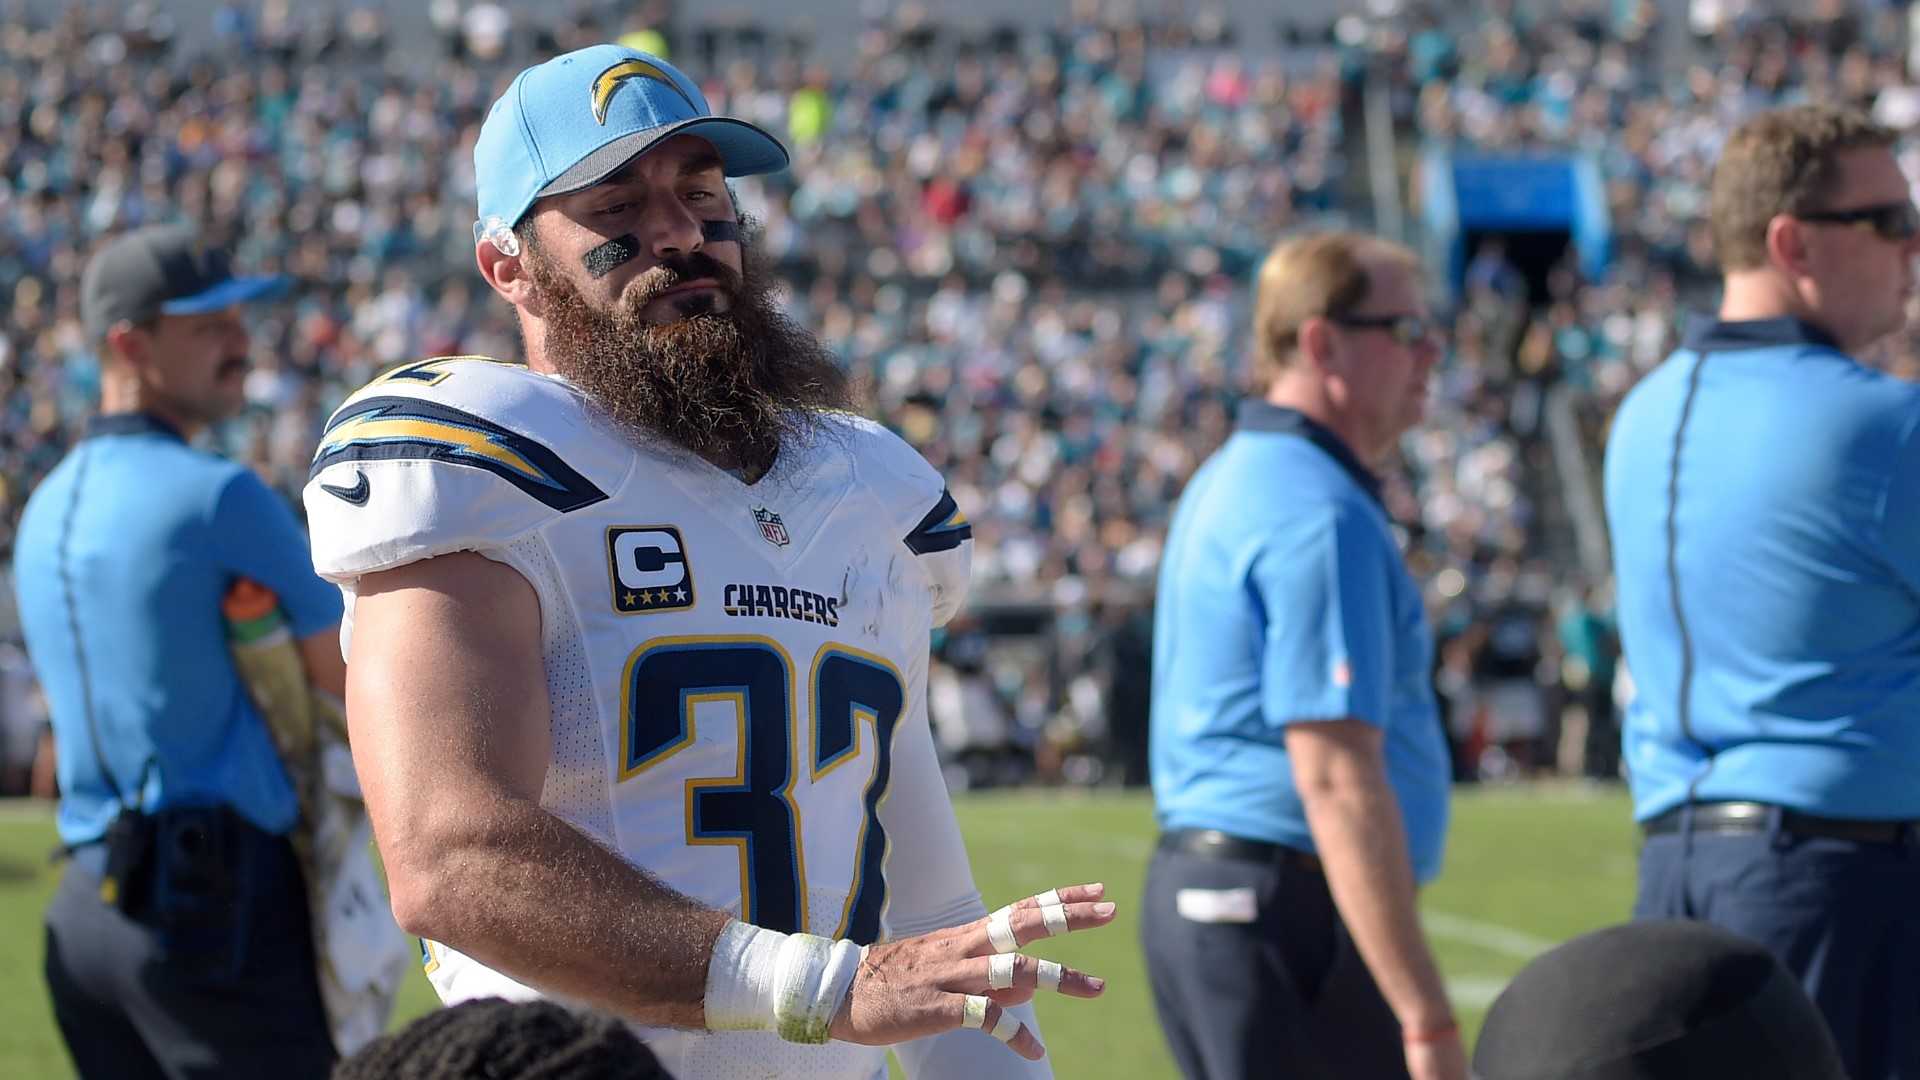 Weddle has gone from retirement to Super Bowl Champion to head coach in a matter of weeks.